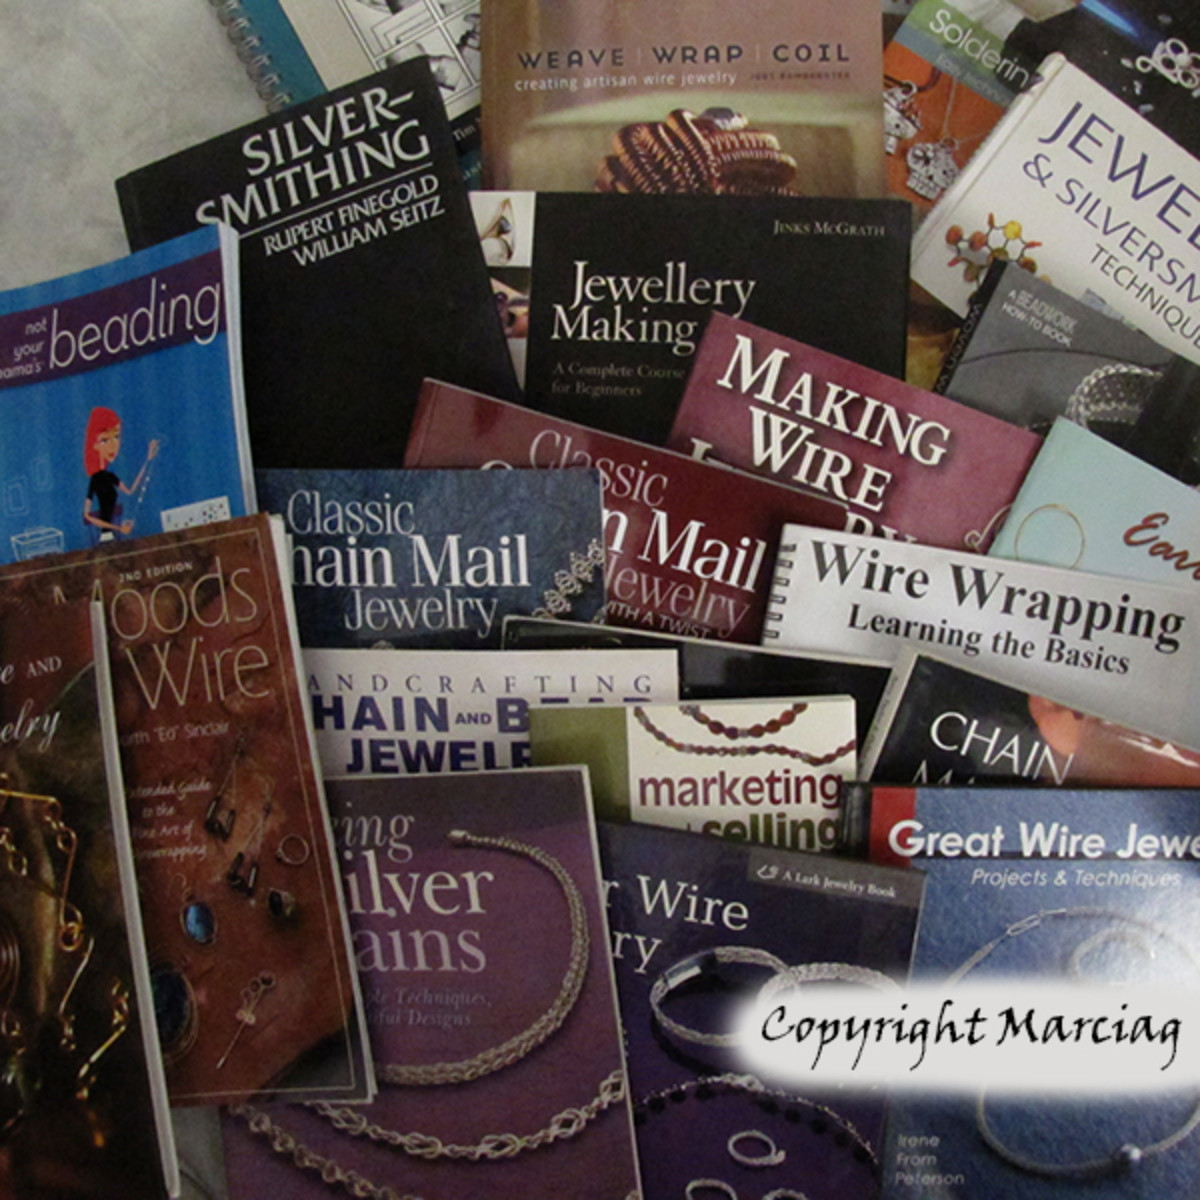 jewelry books I have at home (wire wrapping, chain maille and metalsmithing)